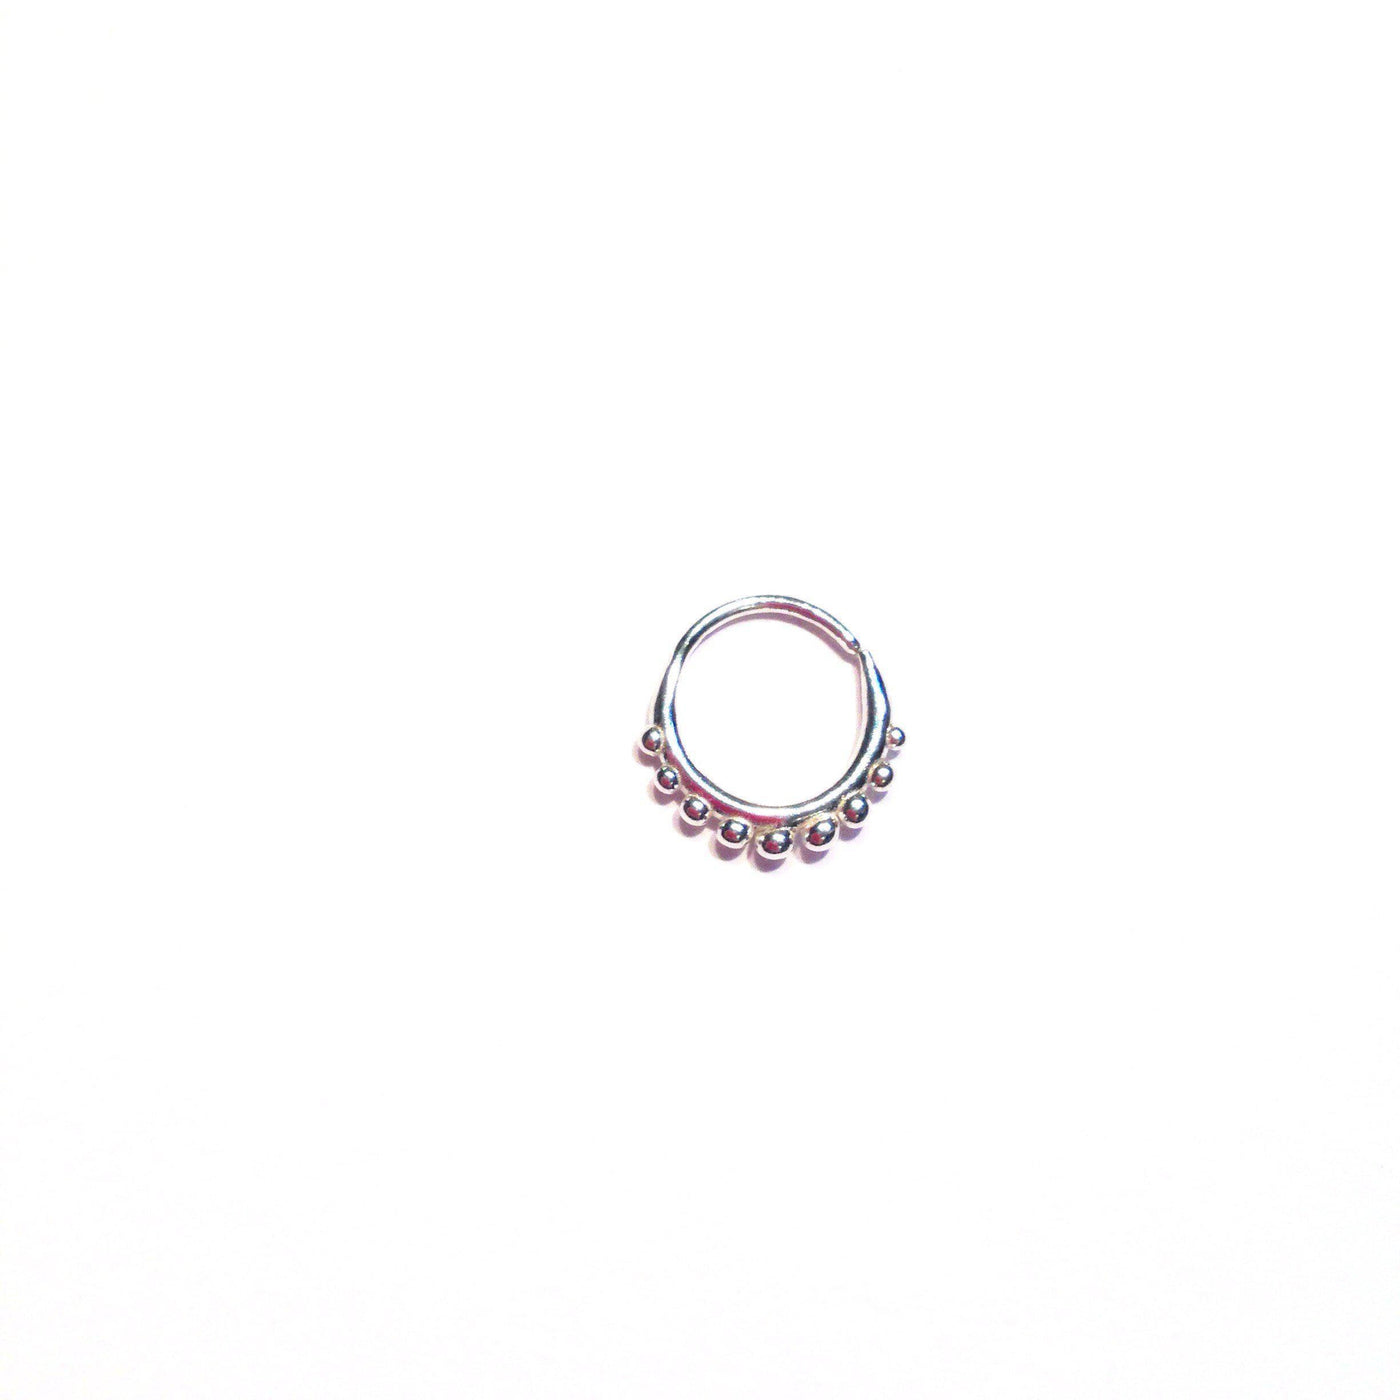 Dalaa Nose Ring // Sterling Silver Nose Ring & Septum Ring-Nose Rings-Twyla Dill-Seattle Jewelry-Handmade Jewelry-Seattle Jeweler-Twyla Dill